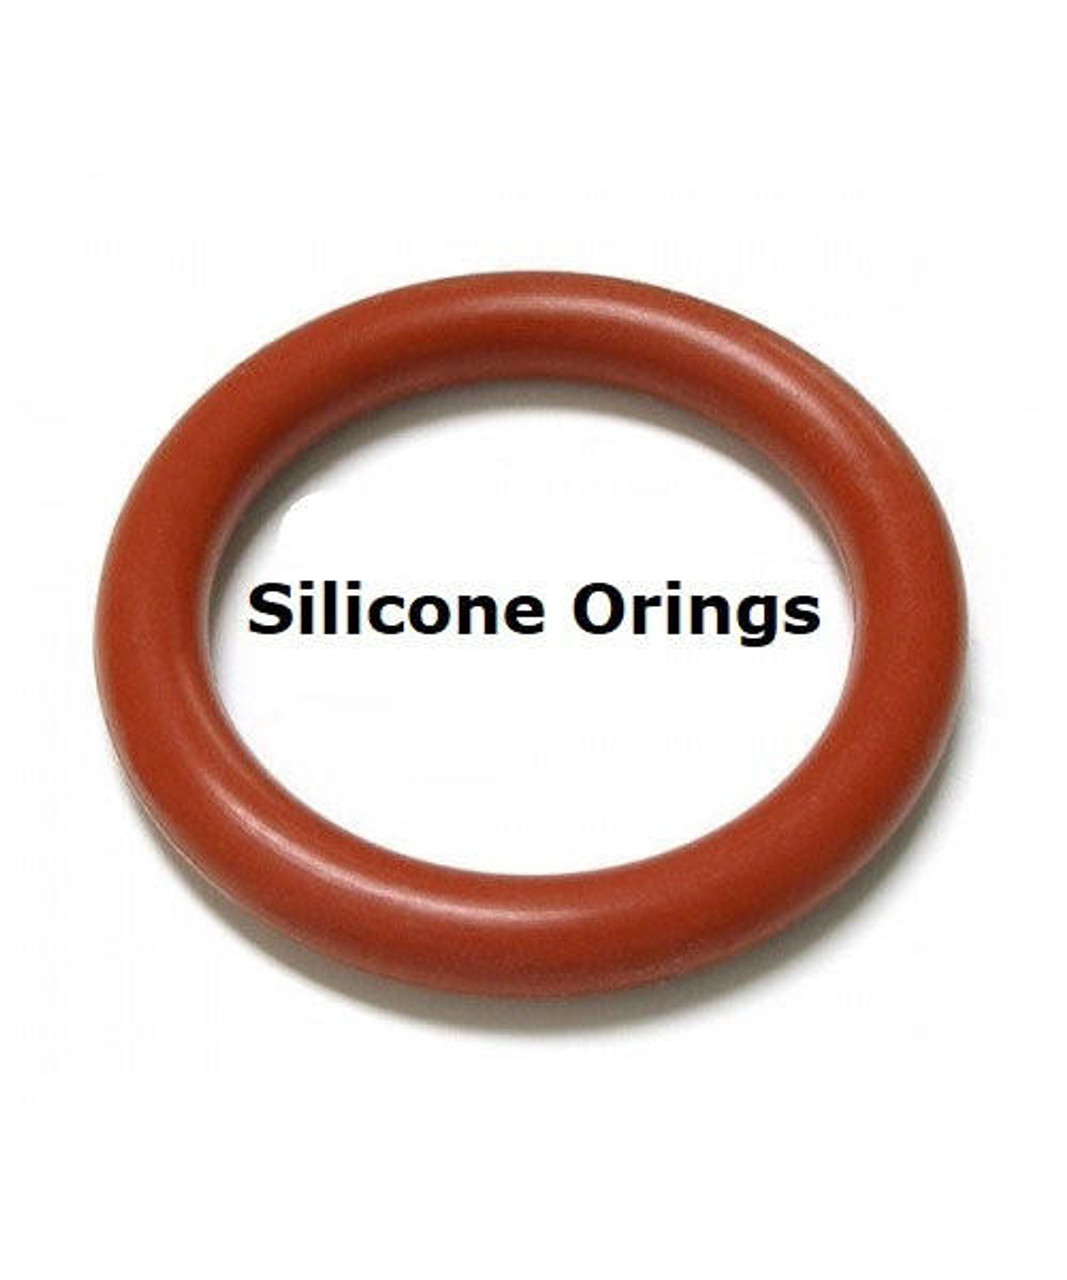 Silicone O-rings Size 374 Price for 1 pc